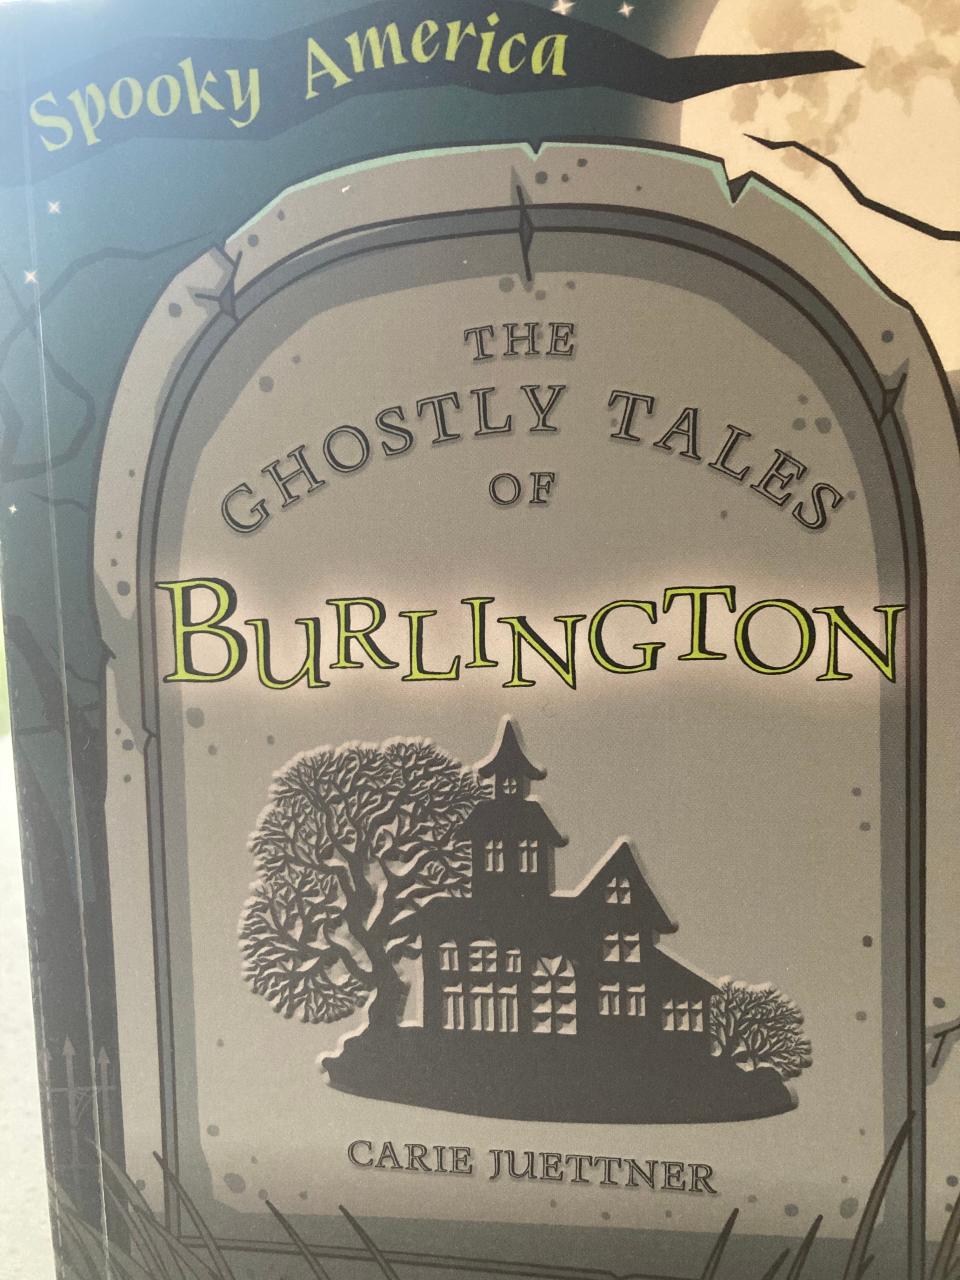 The young-adult story collection "The Ghostly Tales of Burlington."